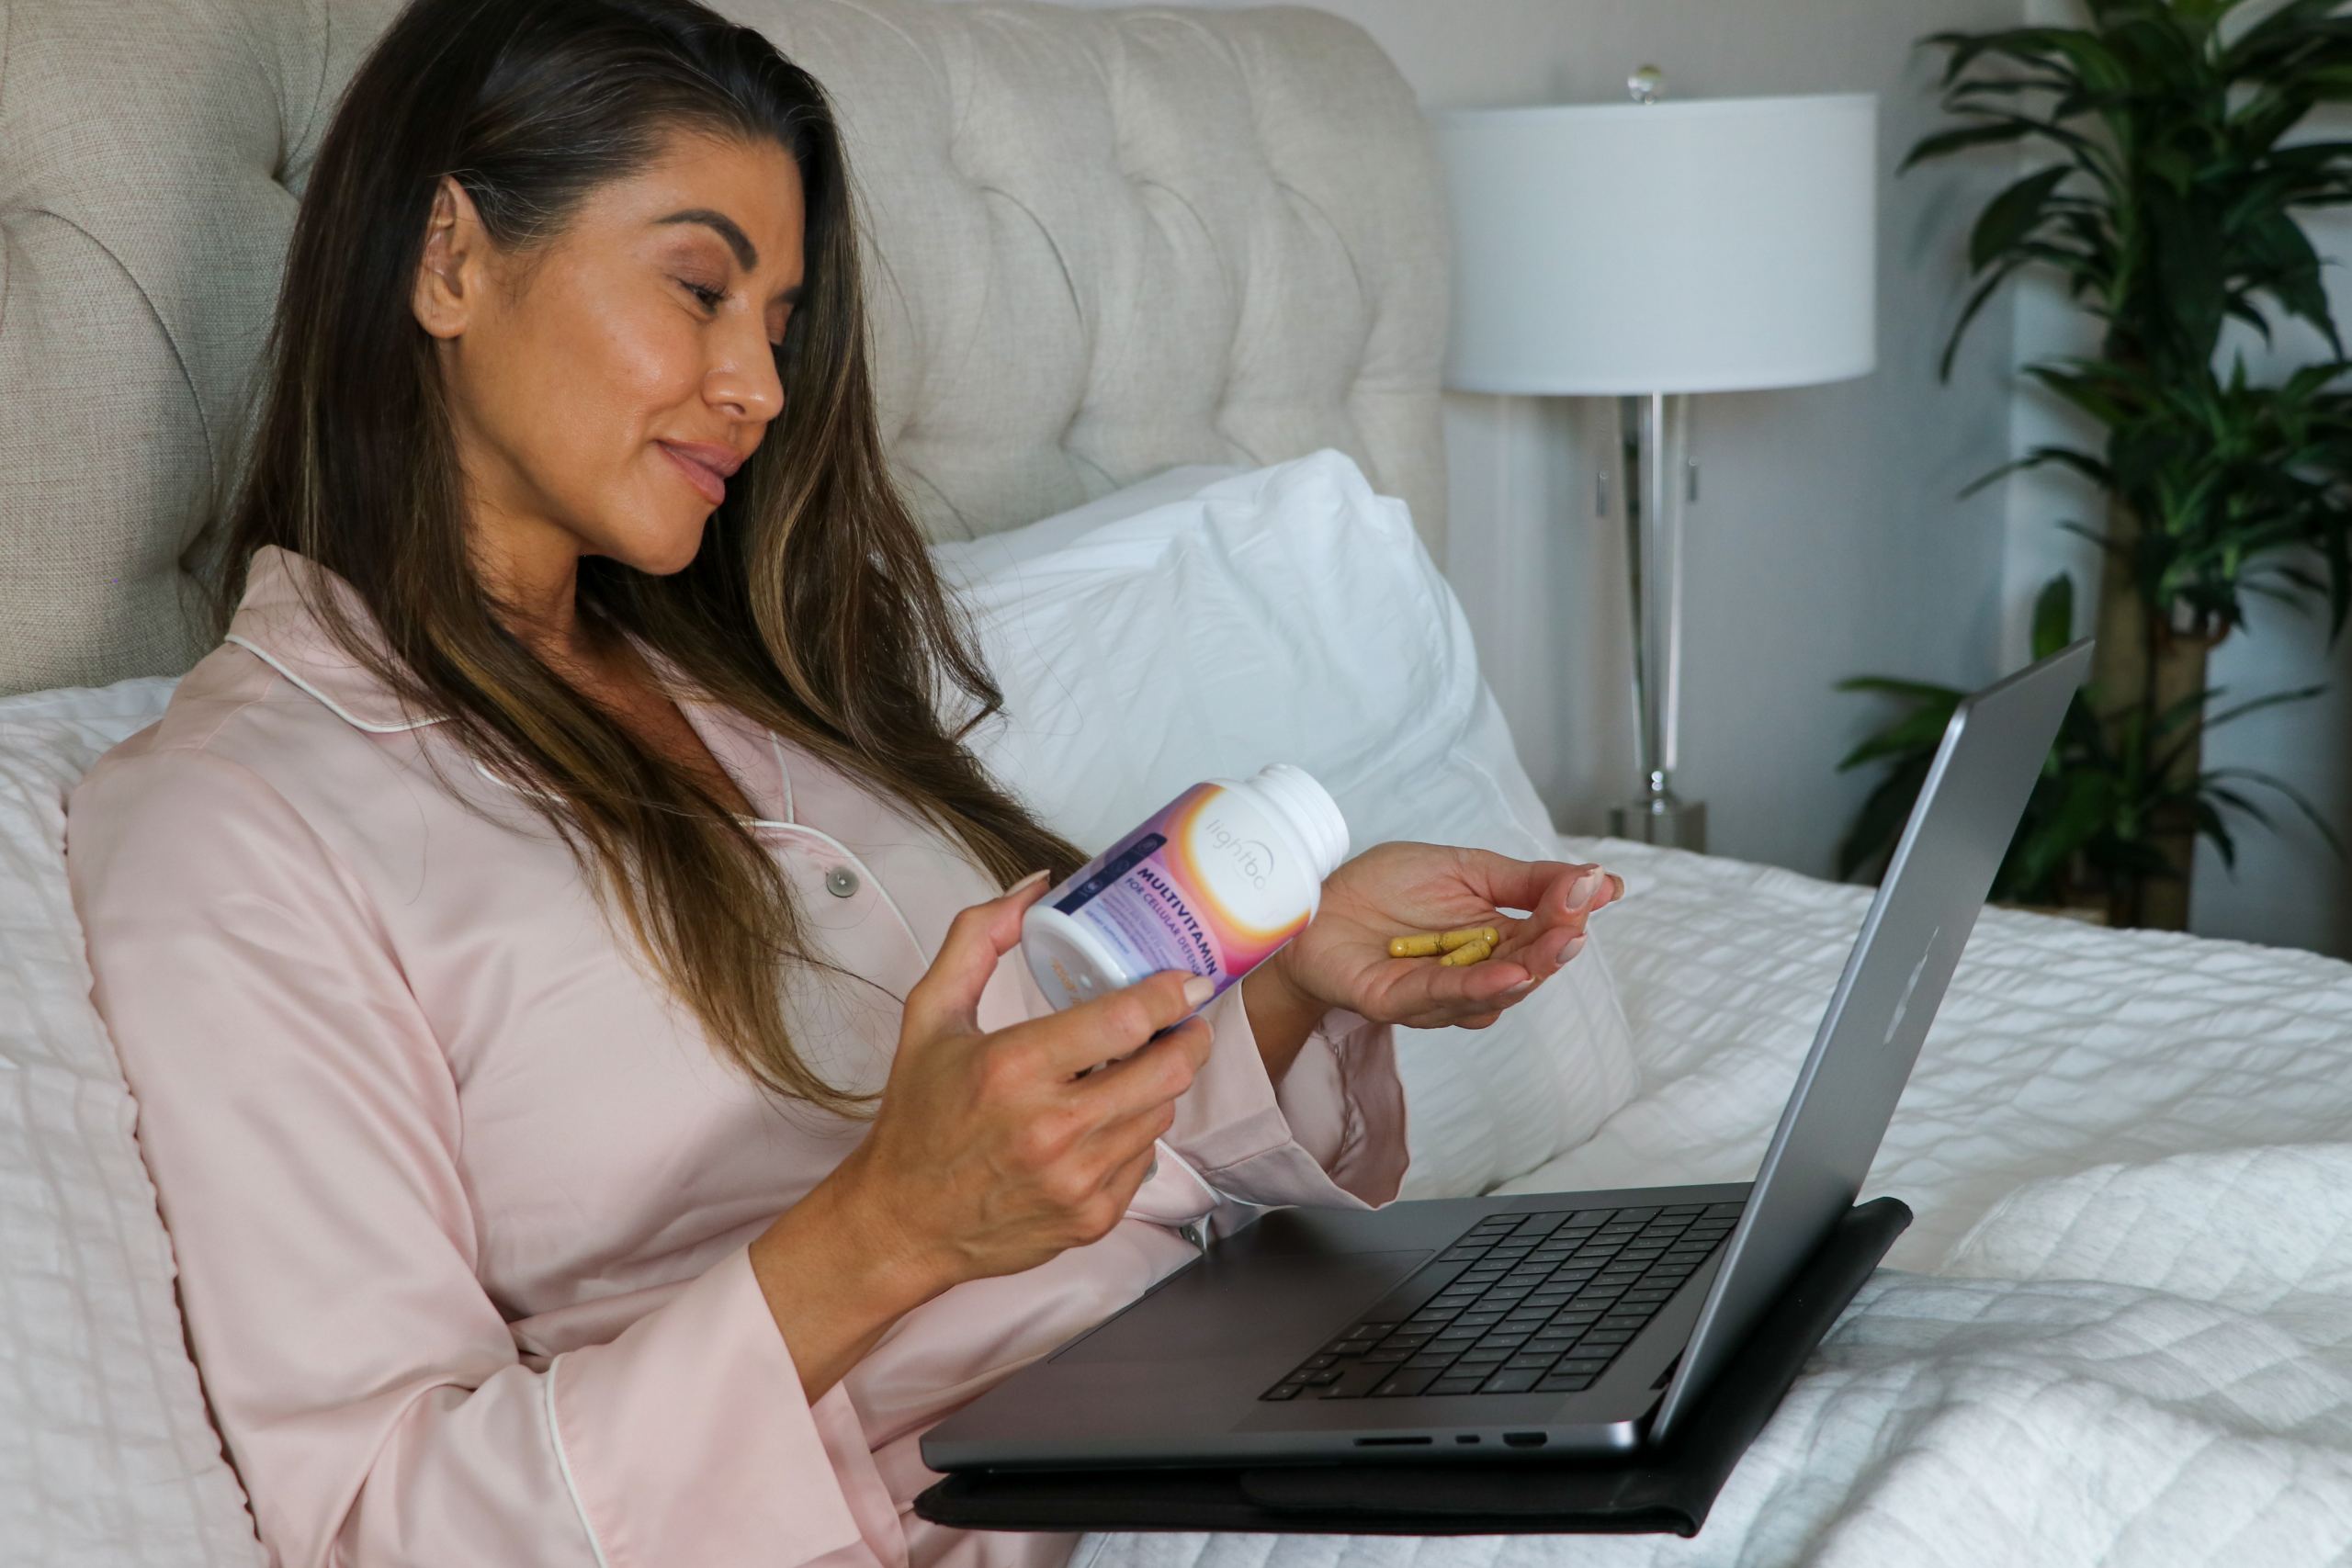 A scene featuring a woman comfortably seated in bed with a laptop on her lap, and in her hands, she holds a vial of dietary supplements for women.